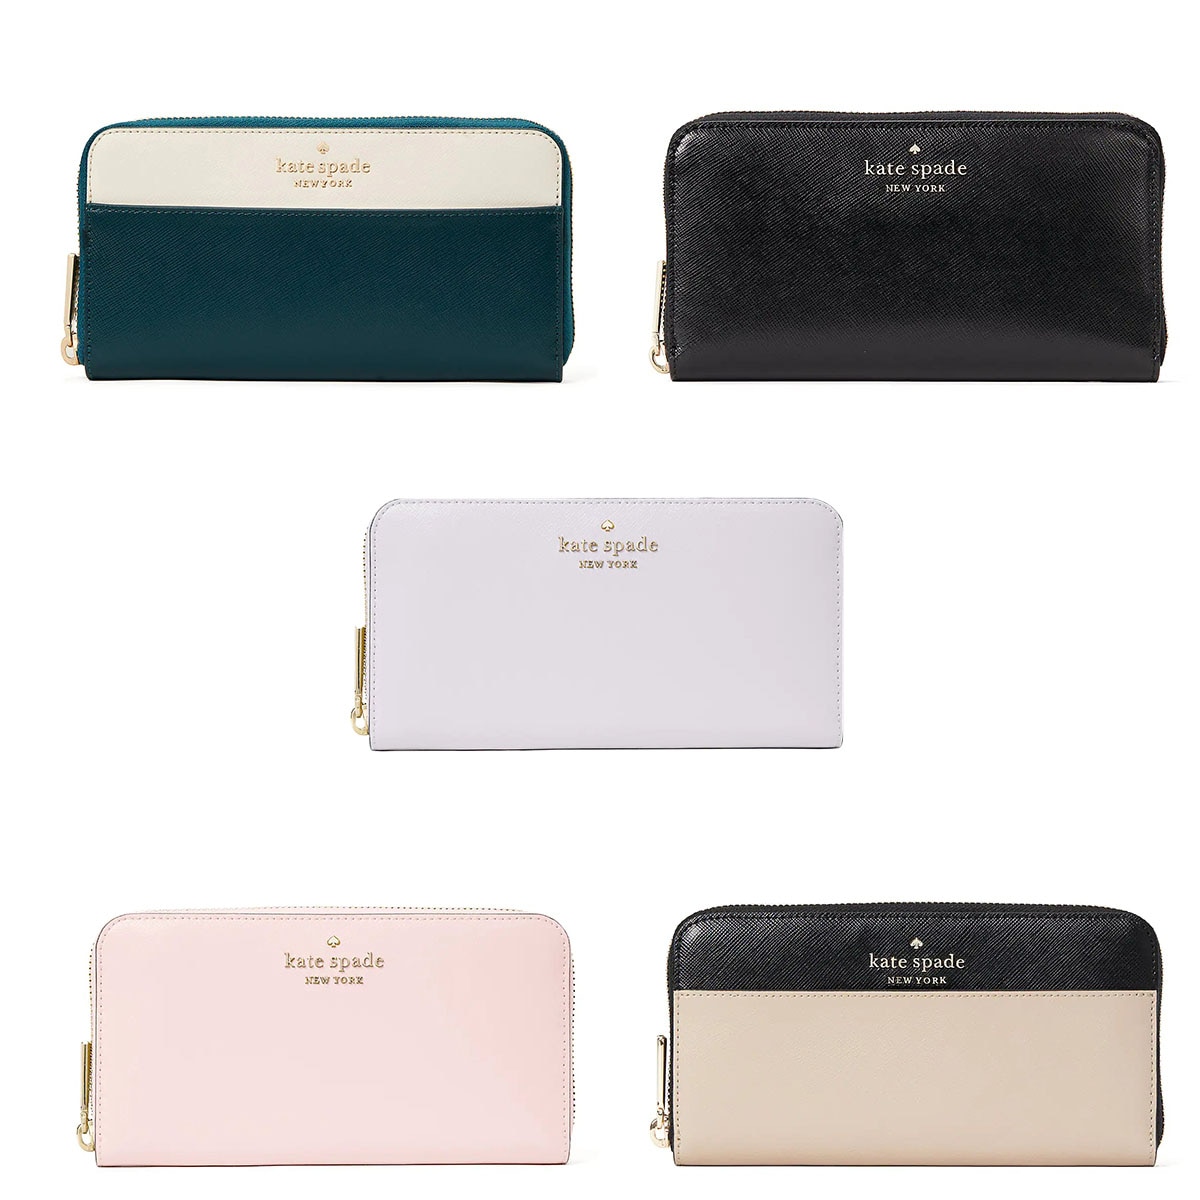 Kate Spade 24-Hour Flash Deal: Get a $230 Wallet for Just $59